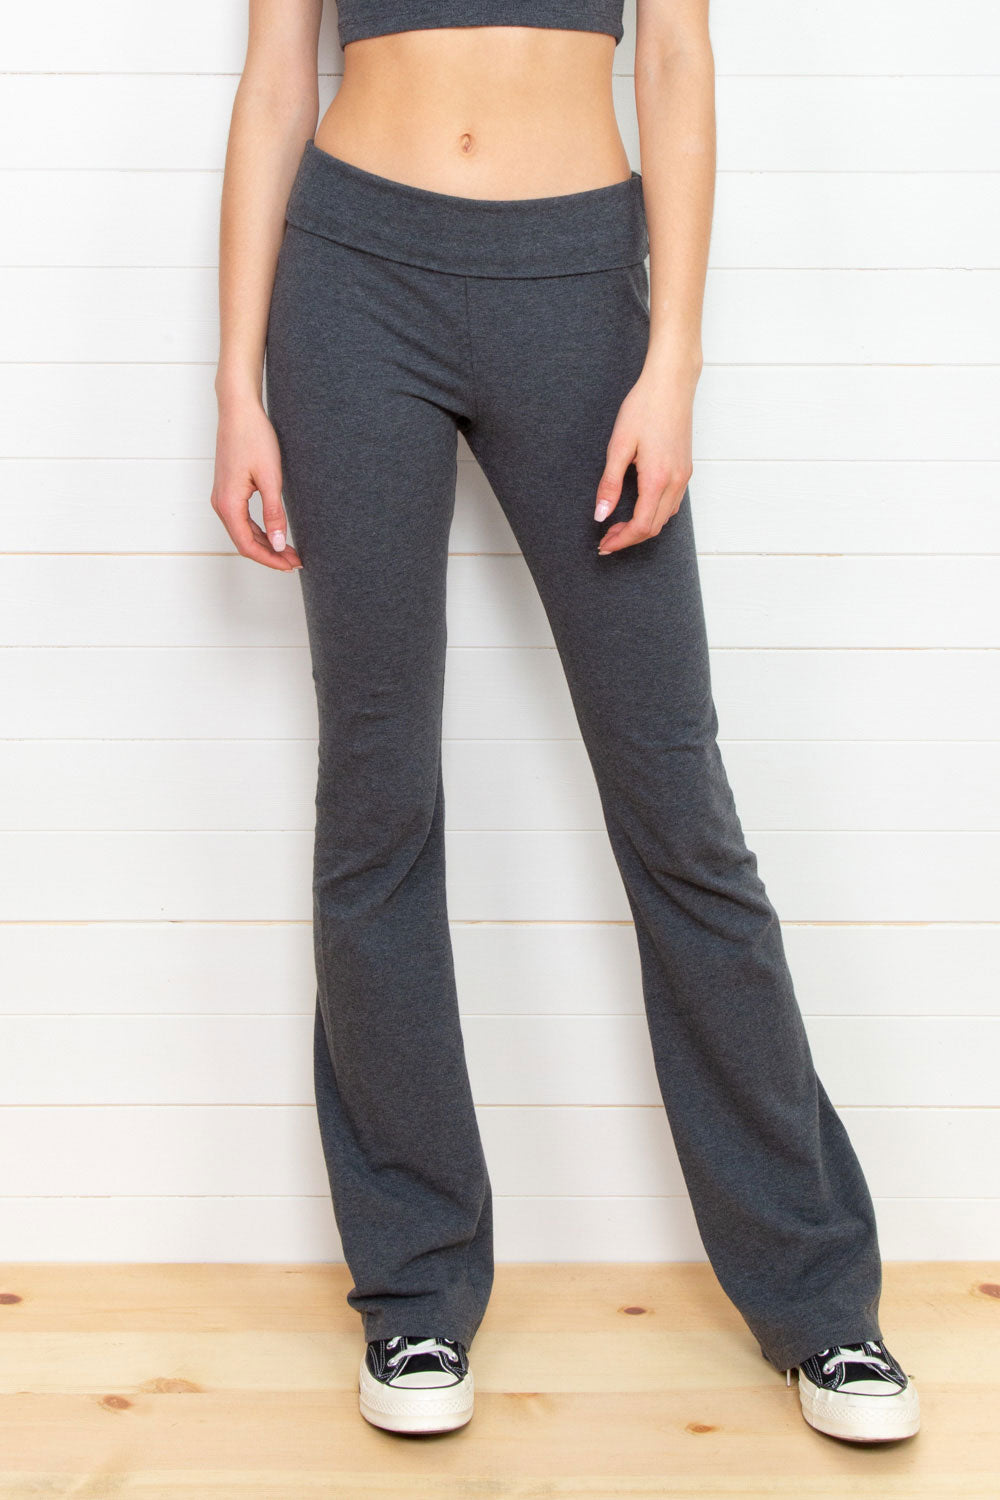 Brandy Melville Flare Yoga Leggings Gray - $28 New With Tags - From  Valentina